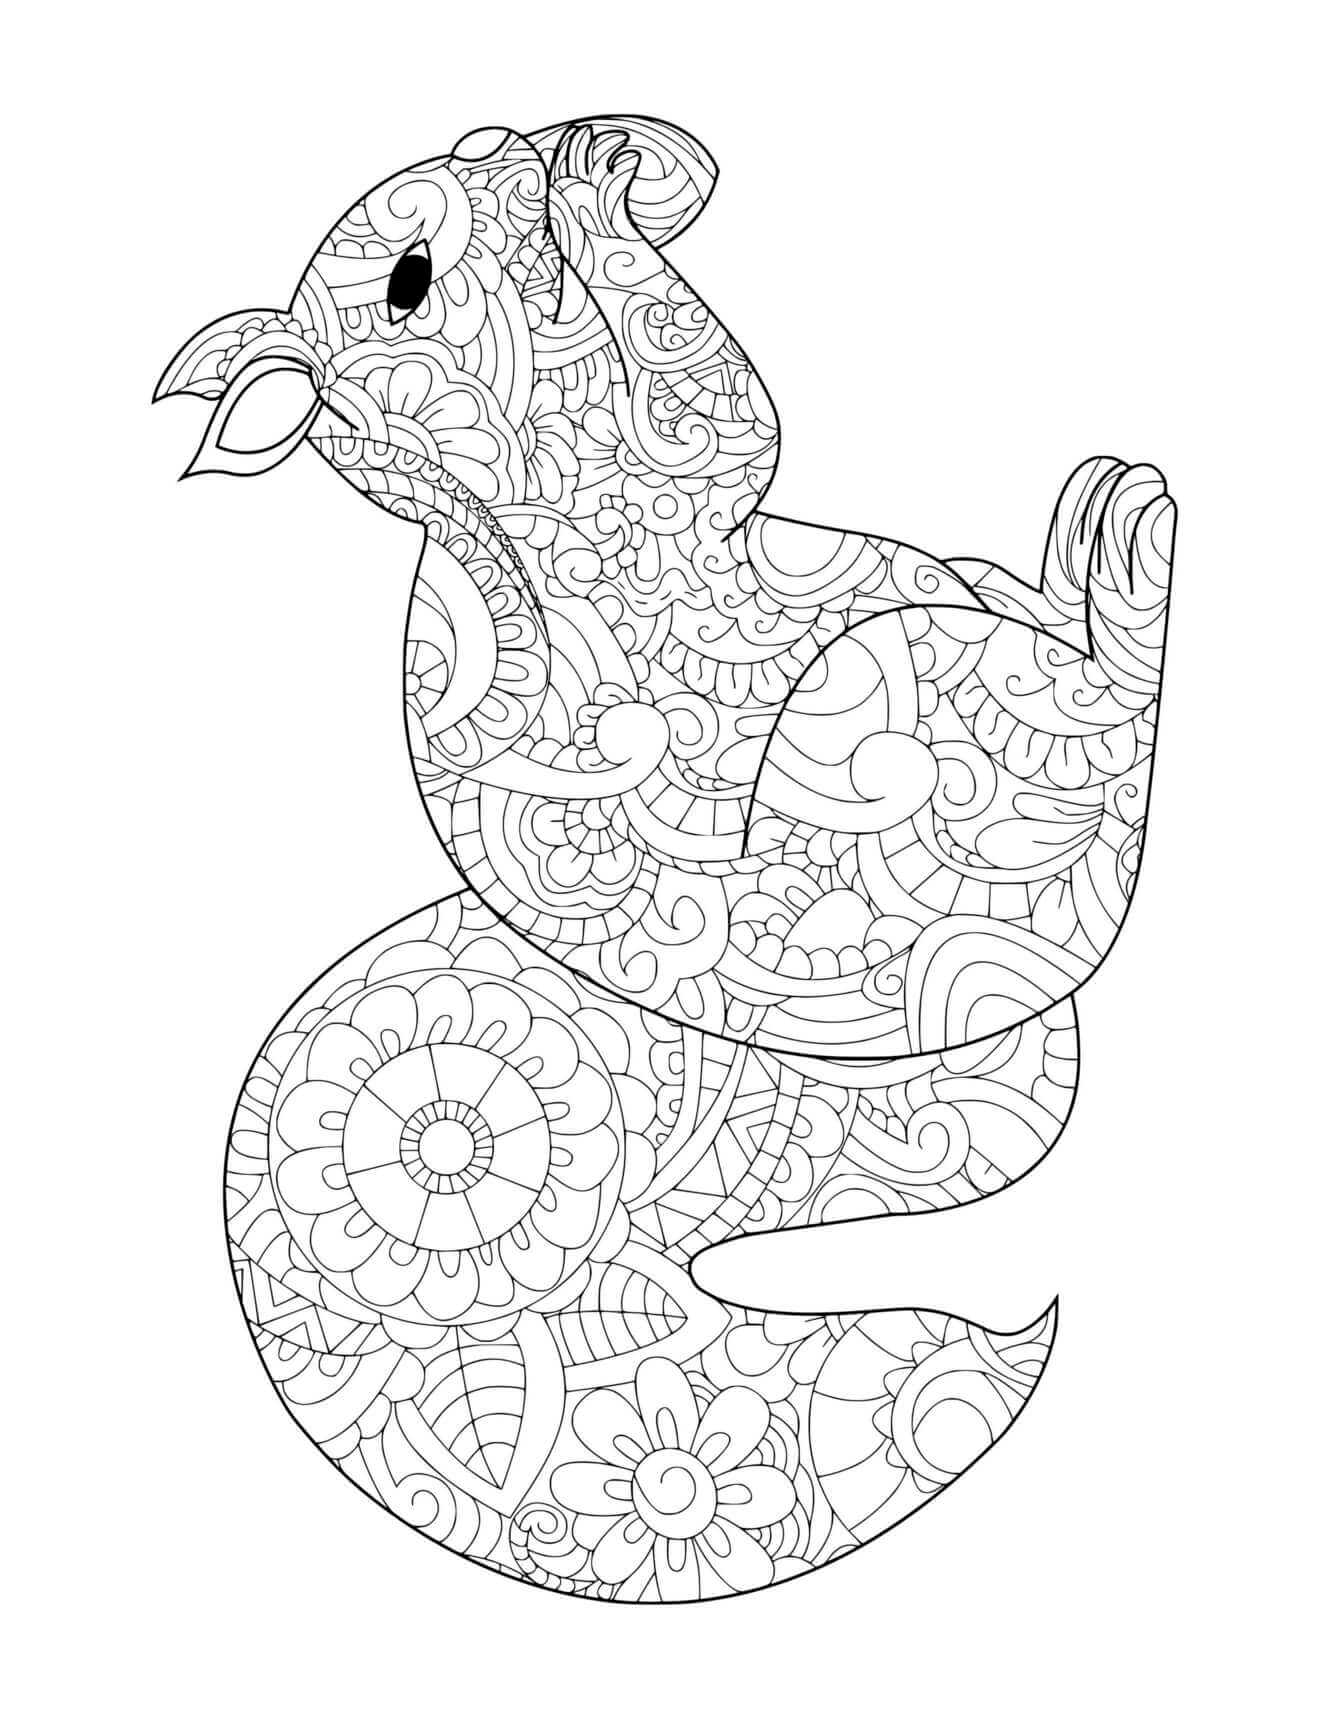 Fall Patterned Squirrel With Acorn For Adults Coloring Page